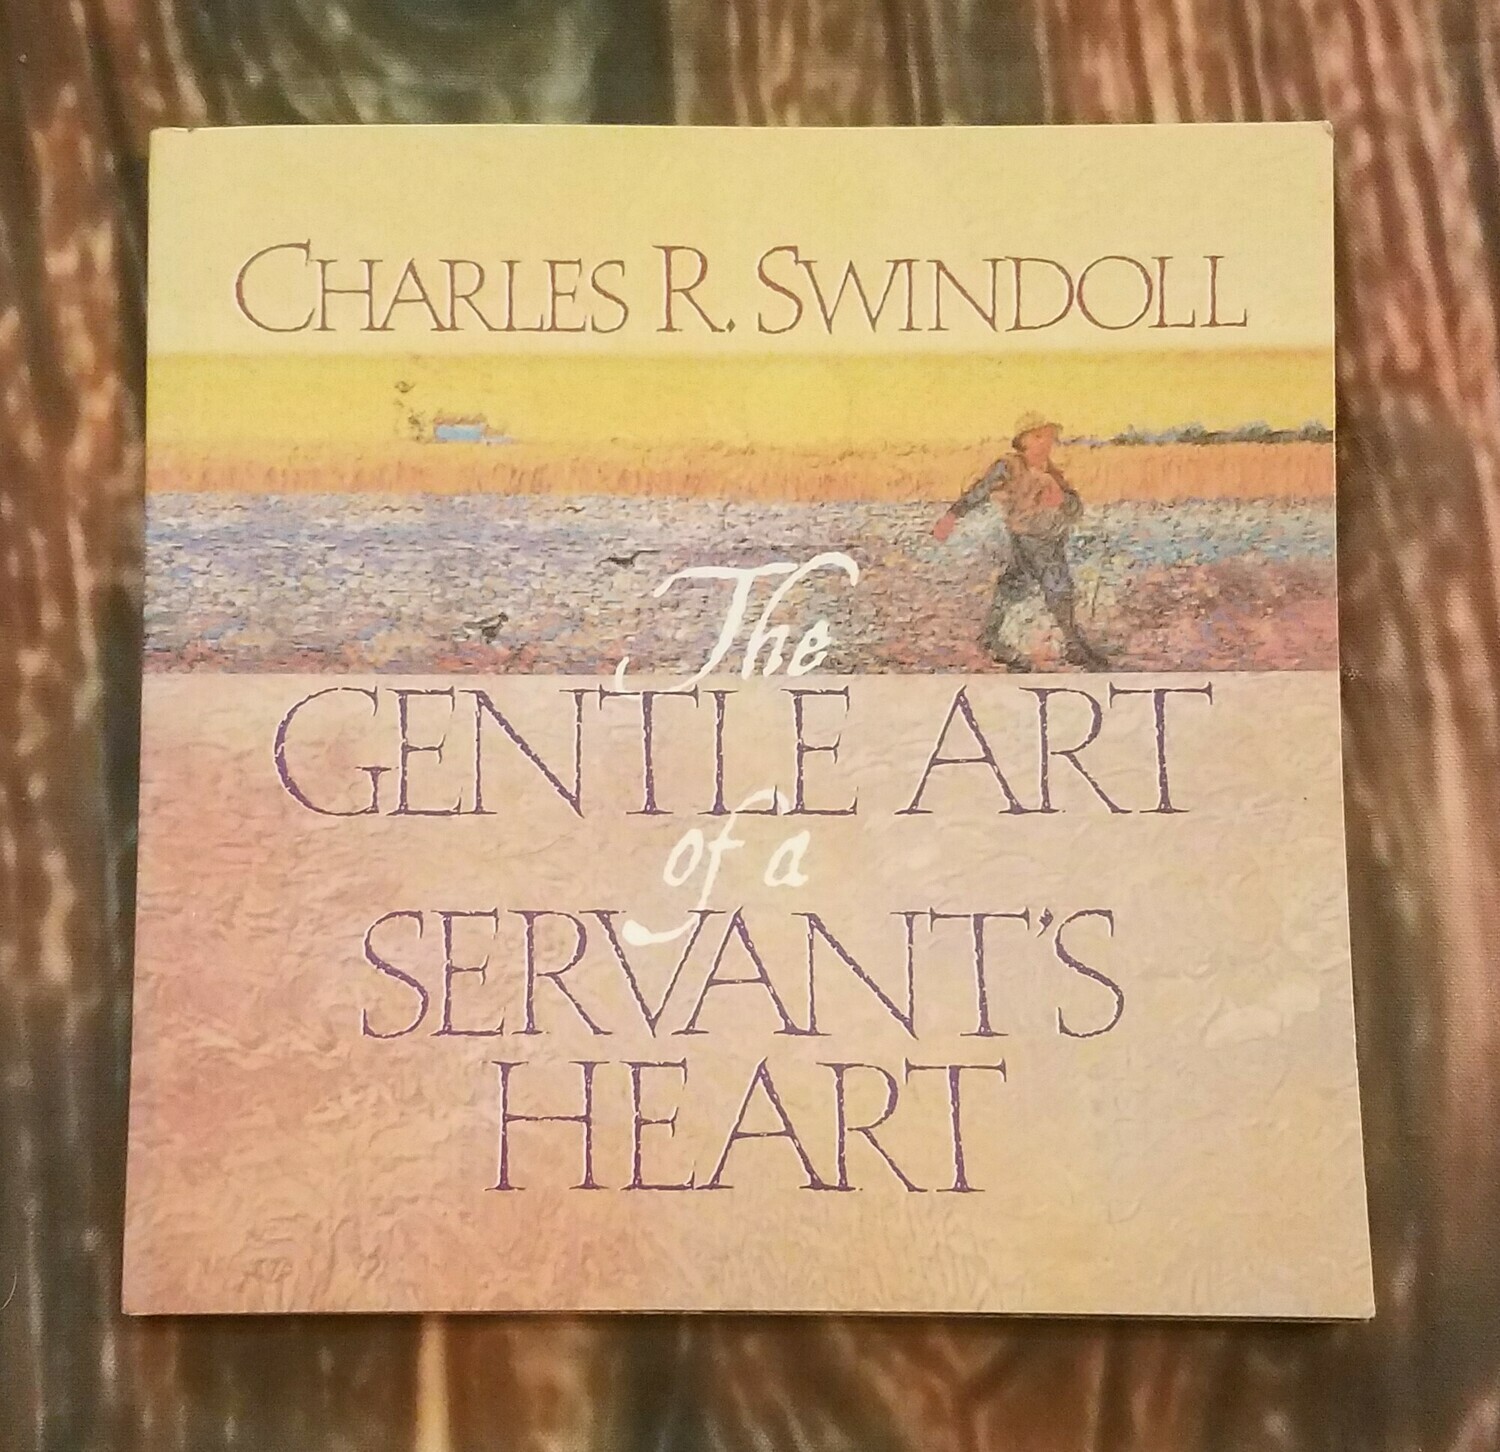 The Gentle Art of a Servant's Heart by Charles R. Swindoll